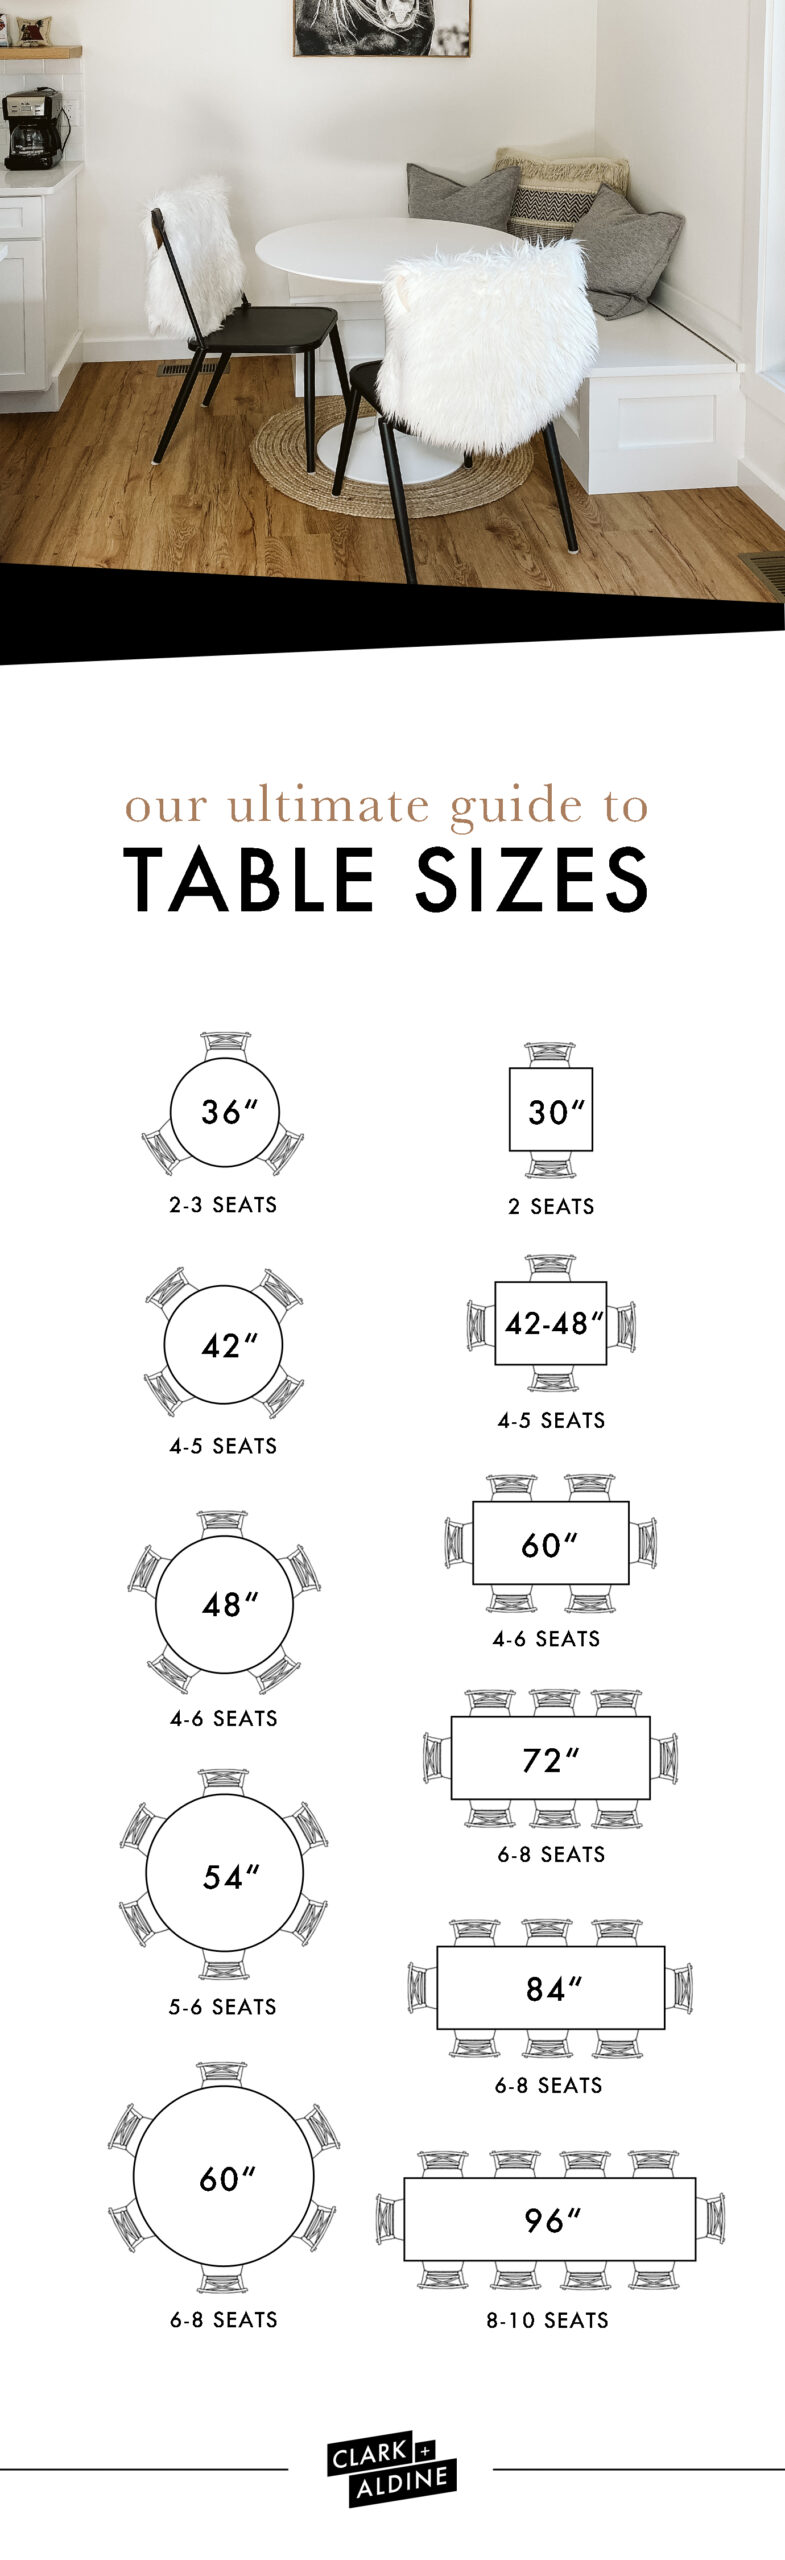 Finding the Right Table Size